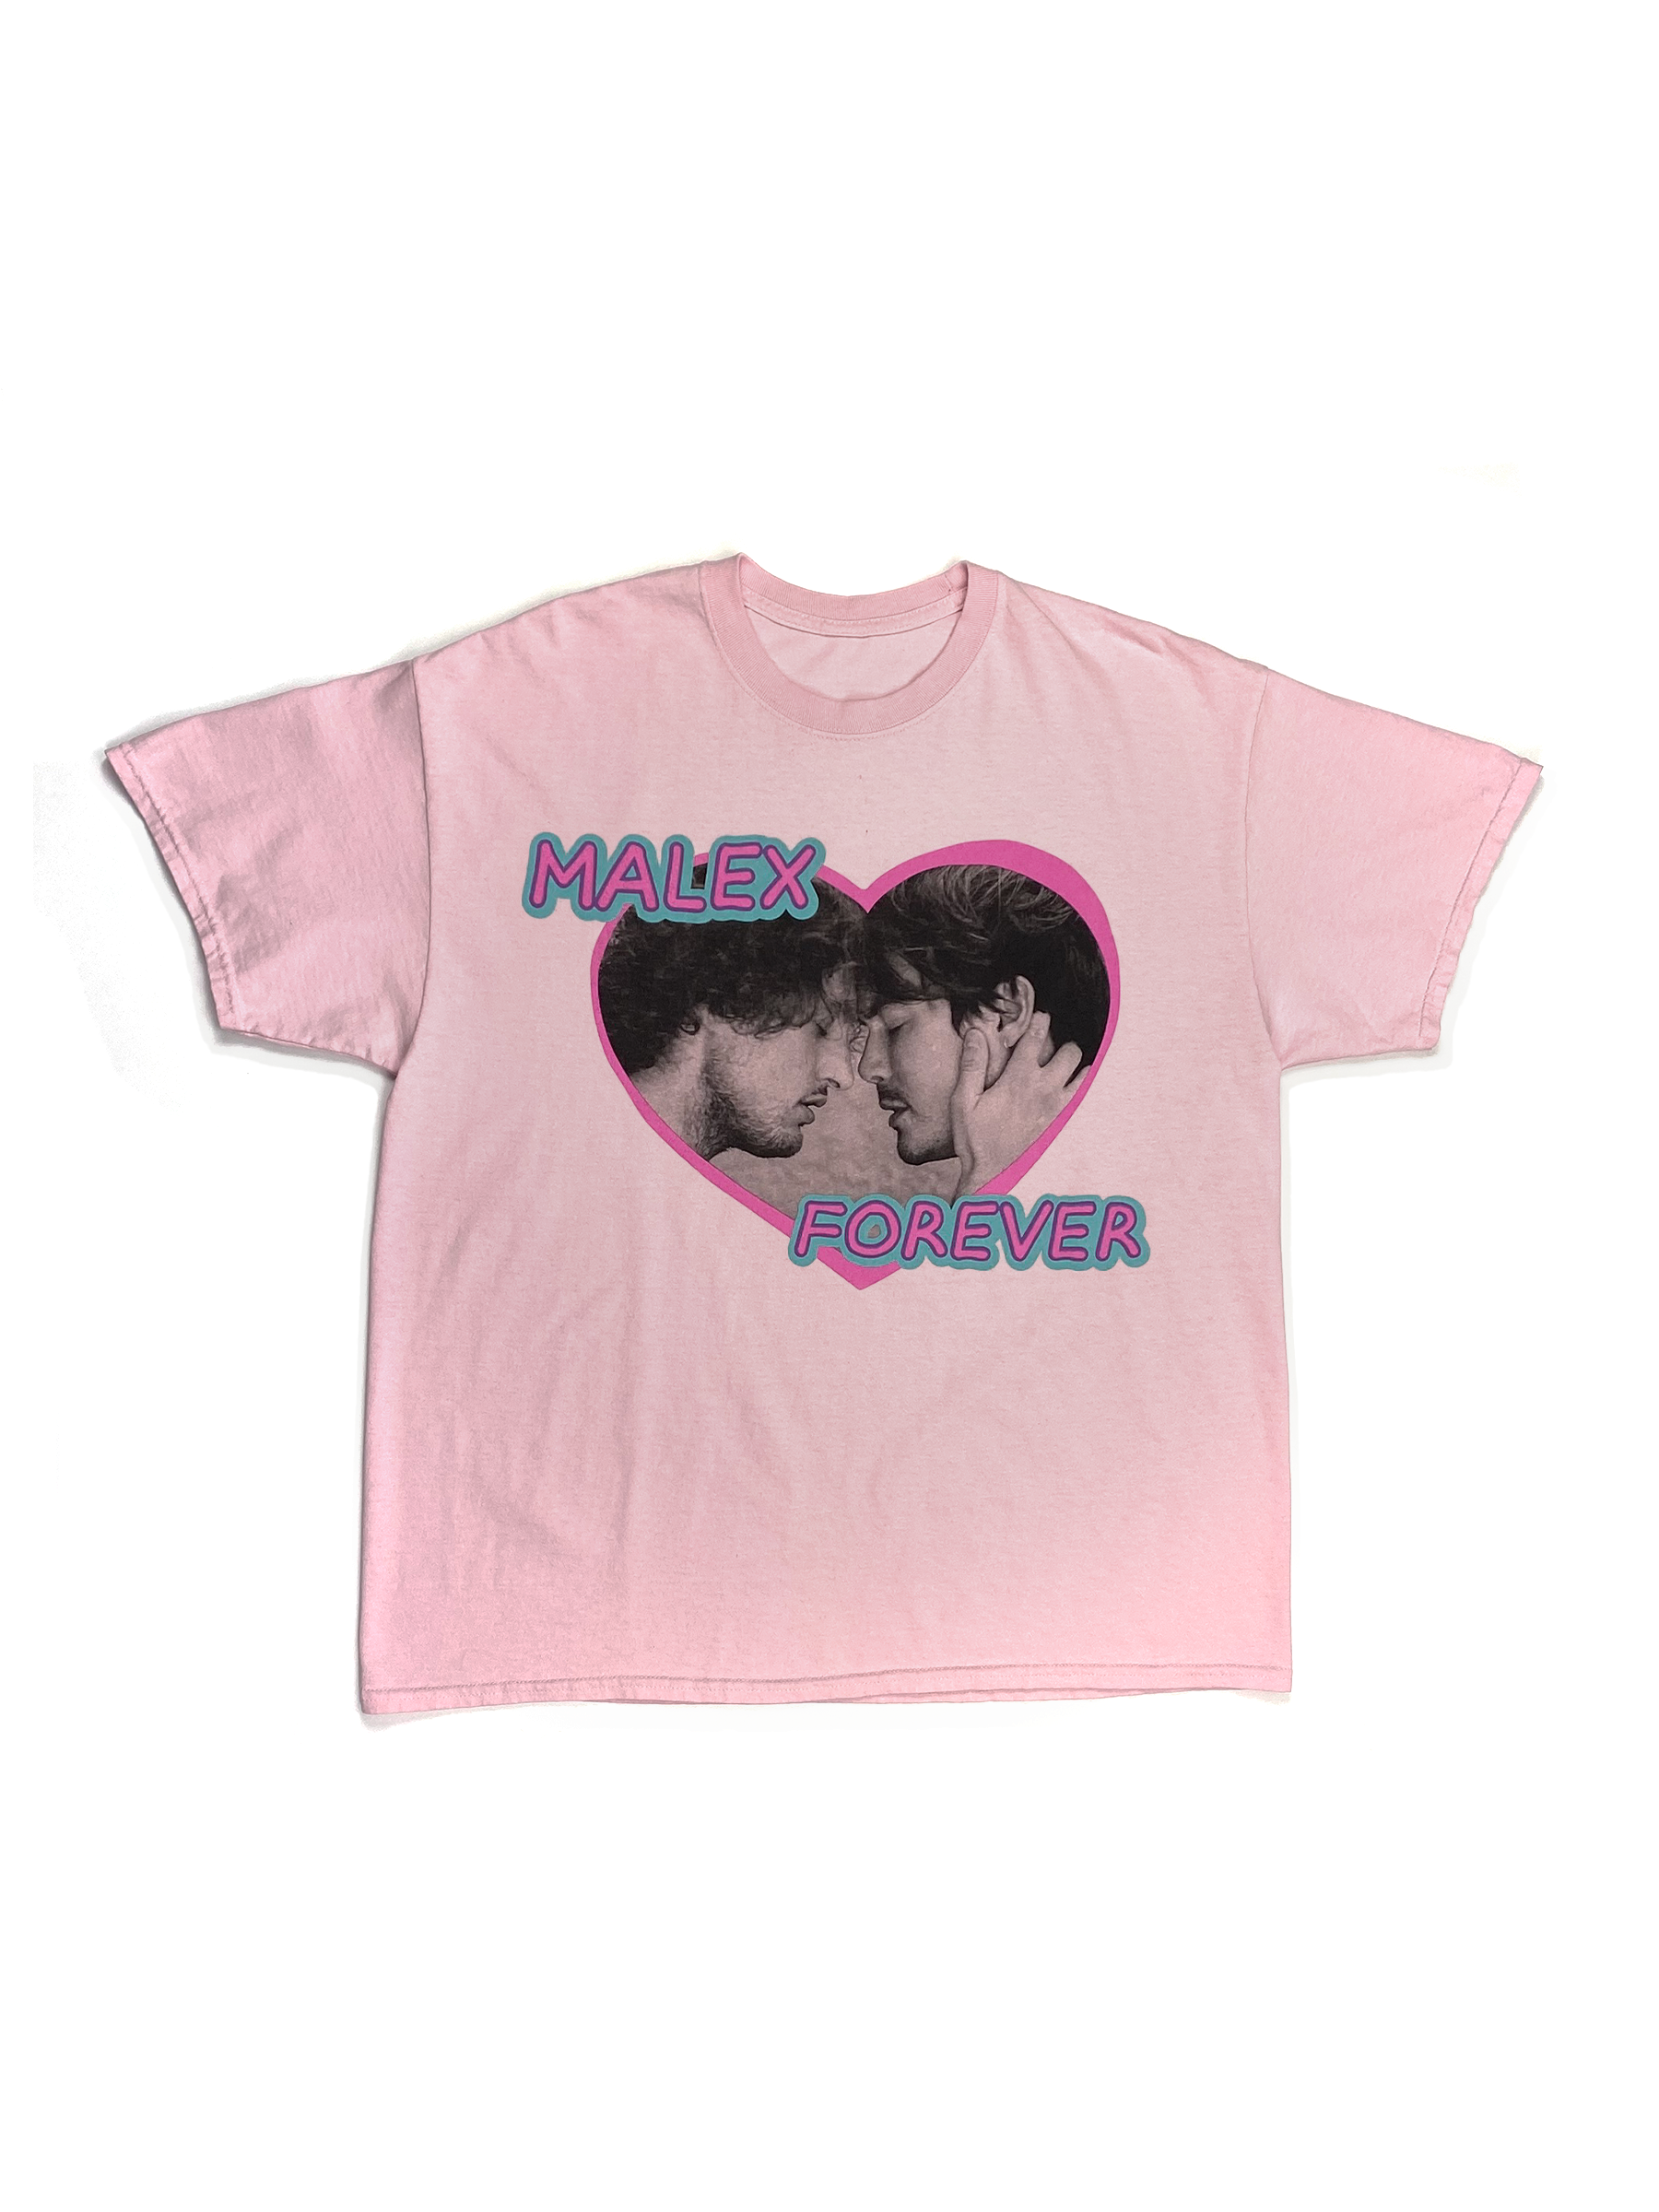 MALEX FOREVER PINK TEE